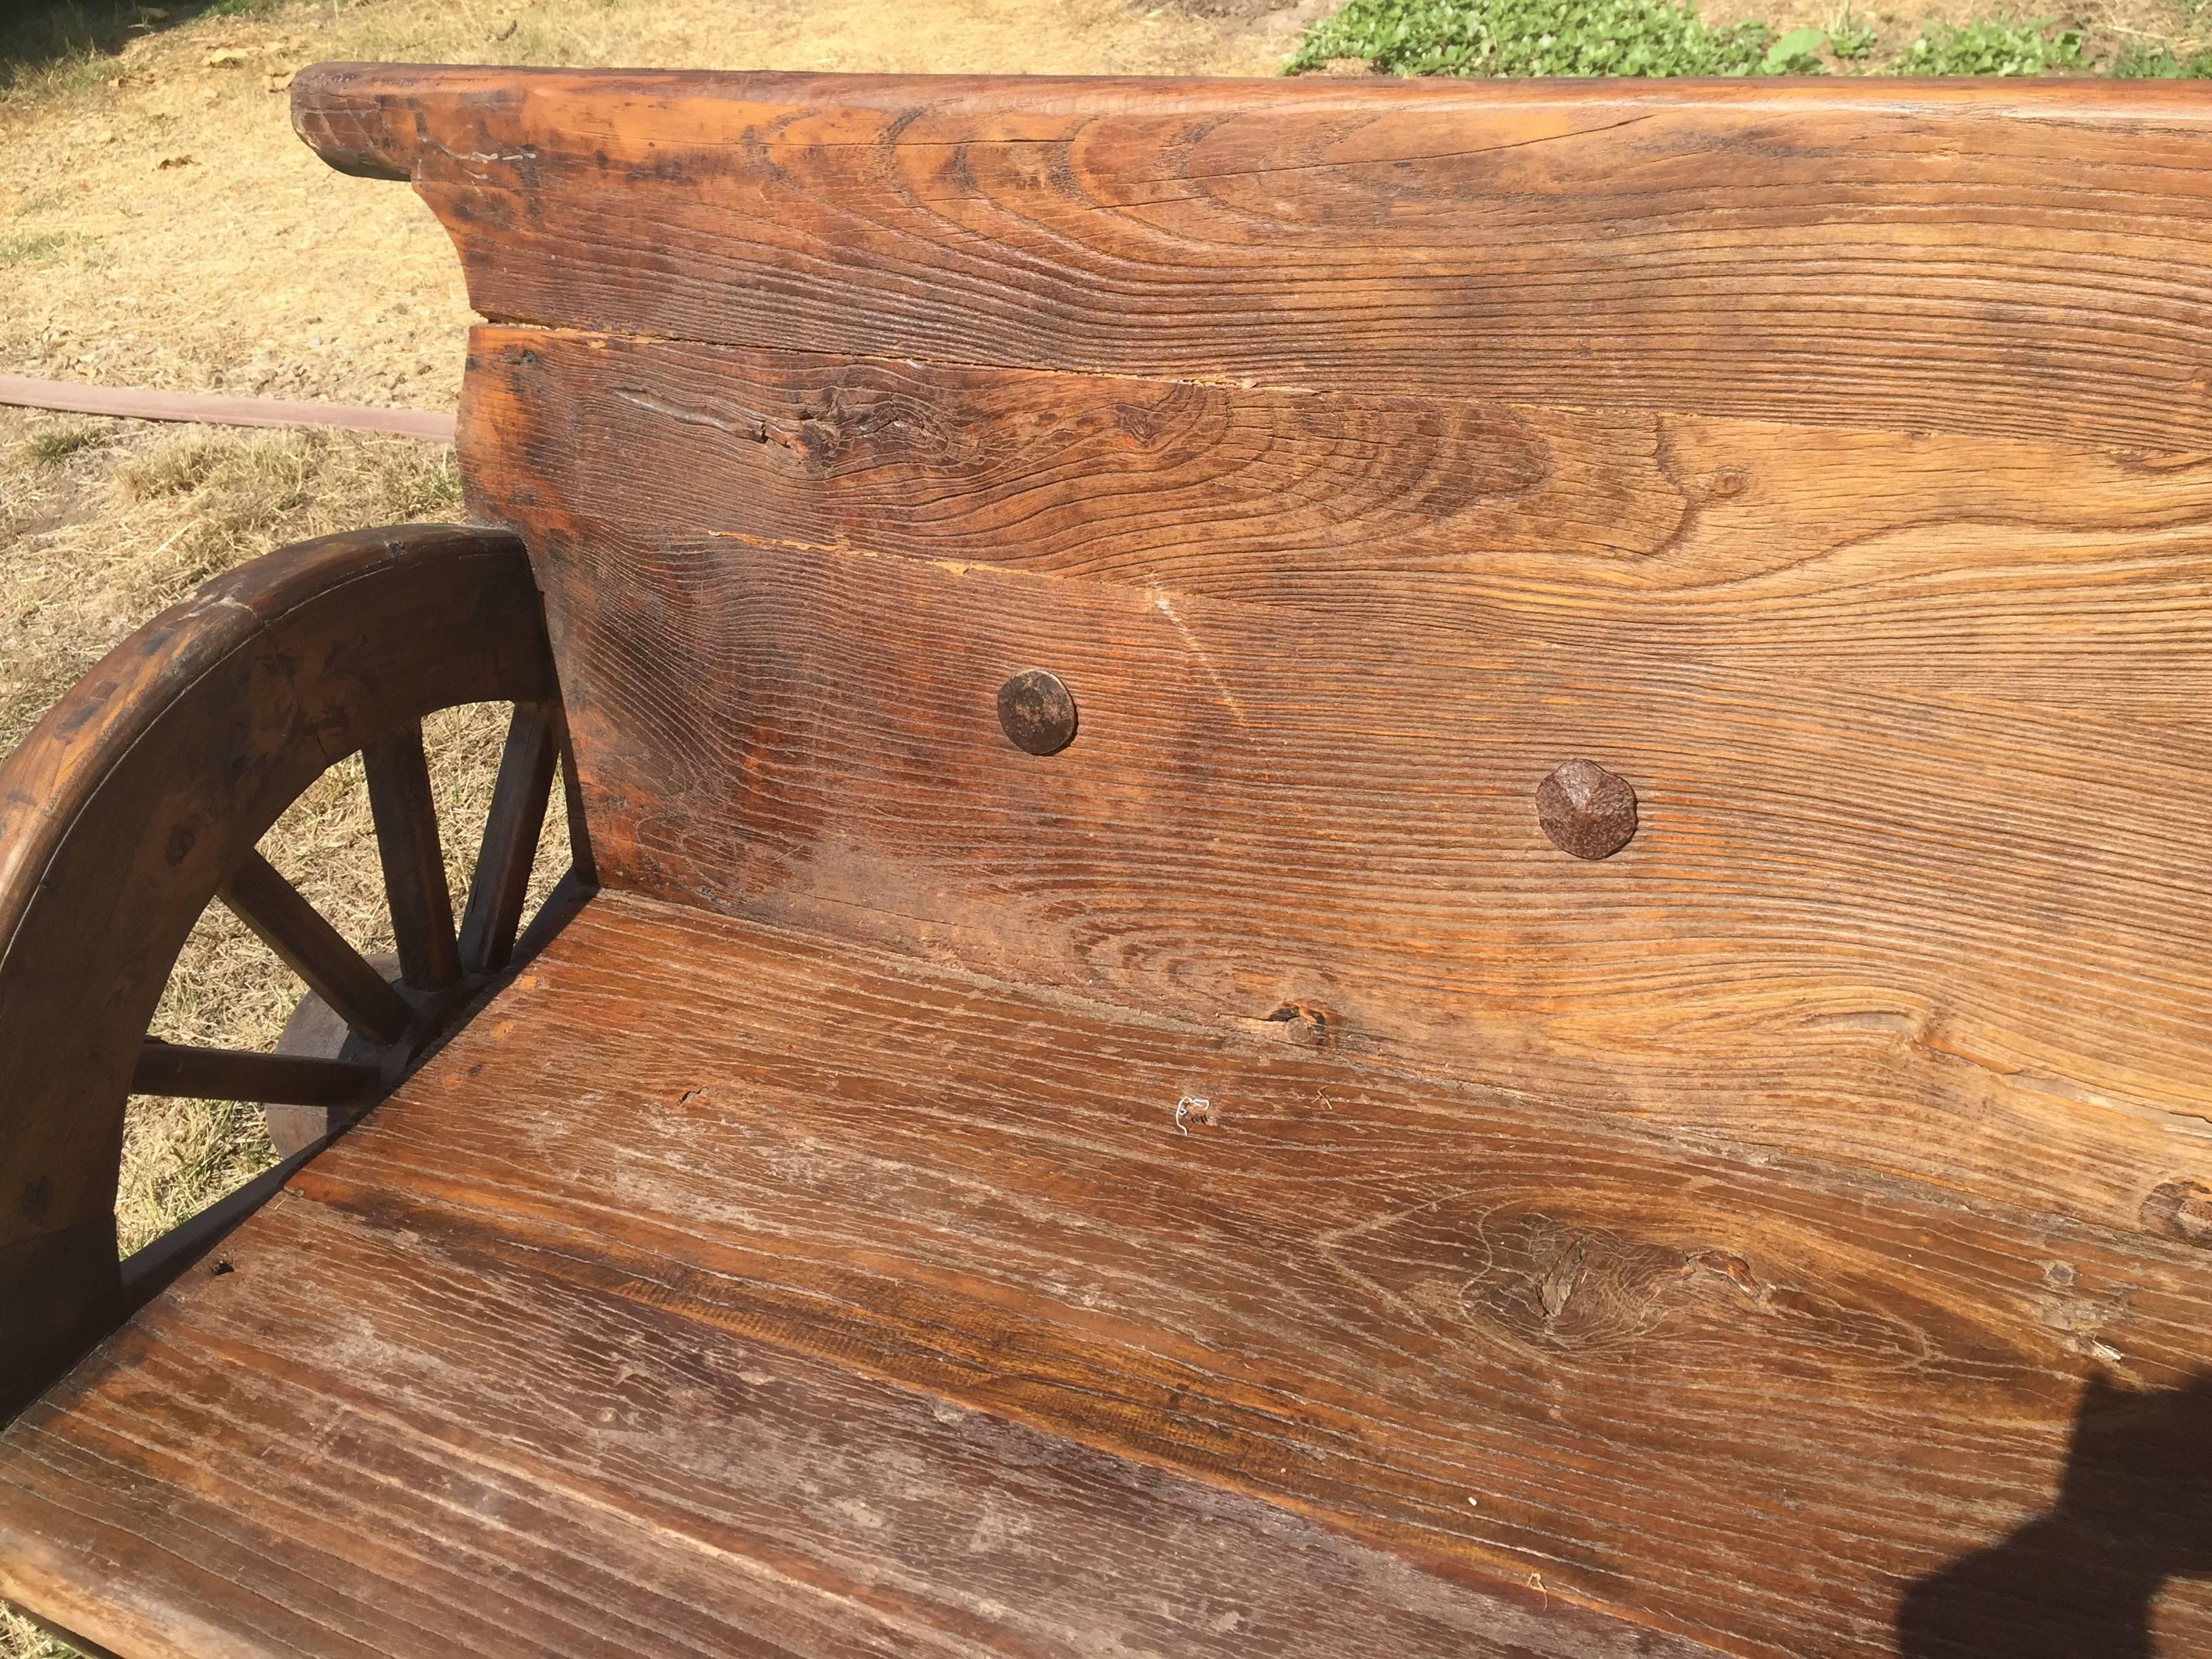 19th Century Rustic Bench with Antique Wheels and Iron Studs